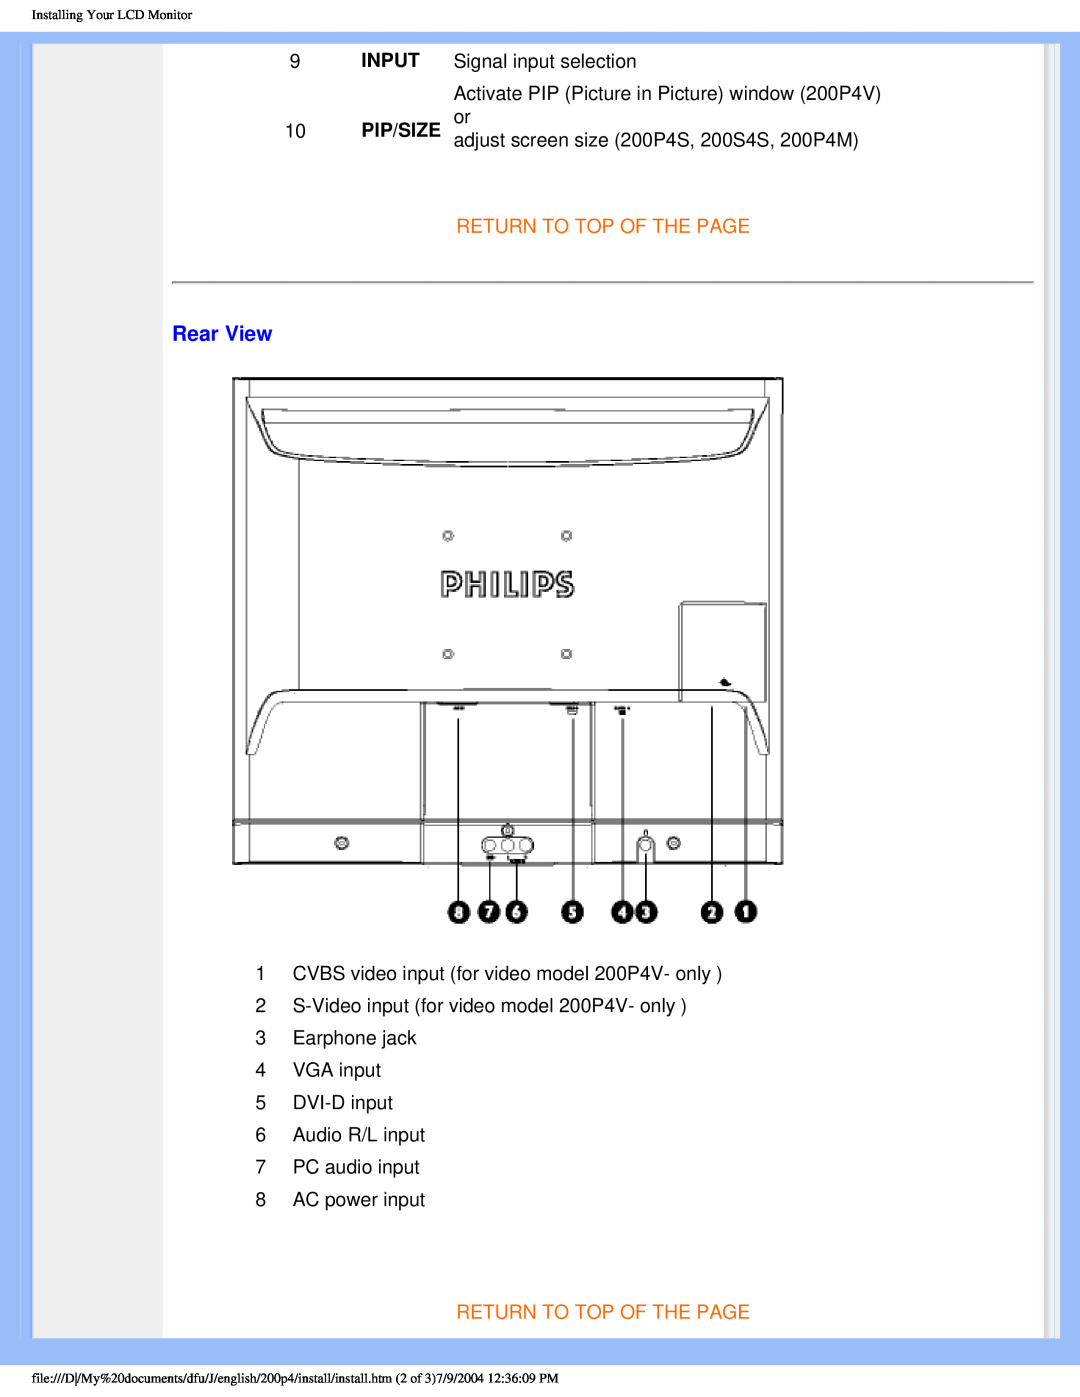 Philips 200S4 user manual Rear View, 9INPUT 10PIP/SIZE, Return To Top Of The Page 